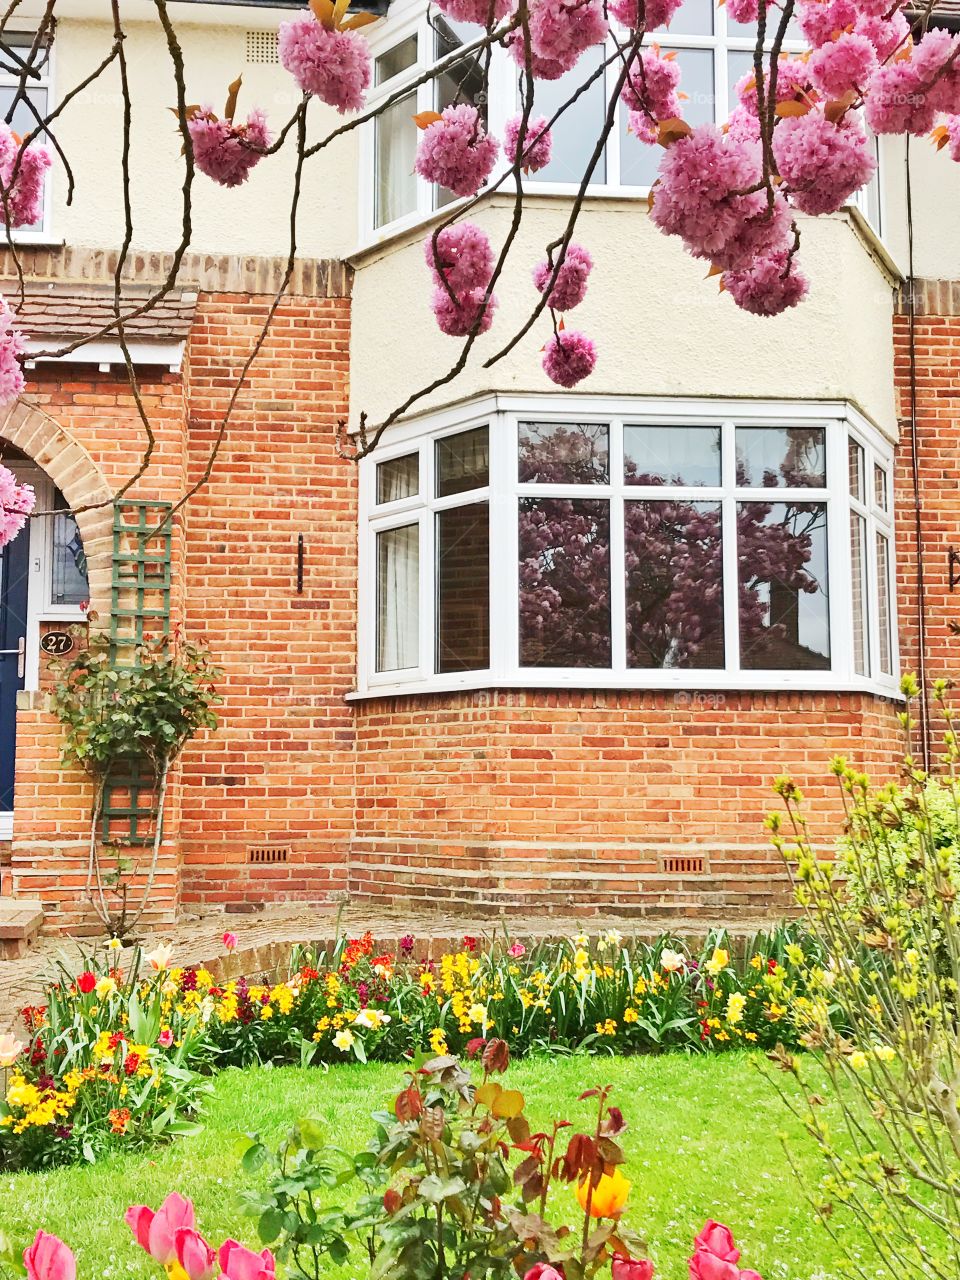 Pink cherry blossom tree and tulips in front of a house in London, UK